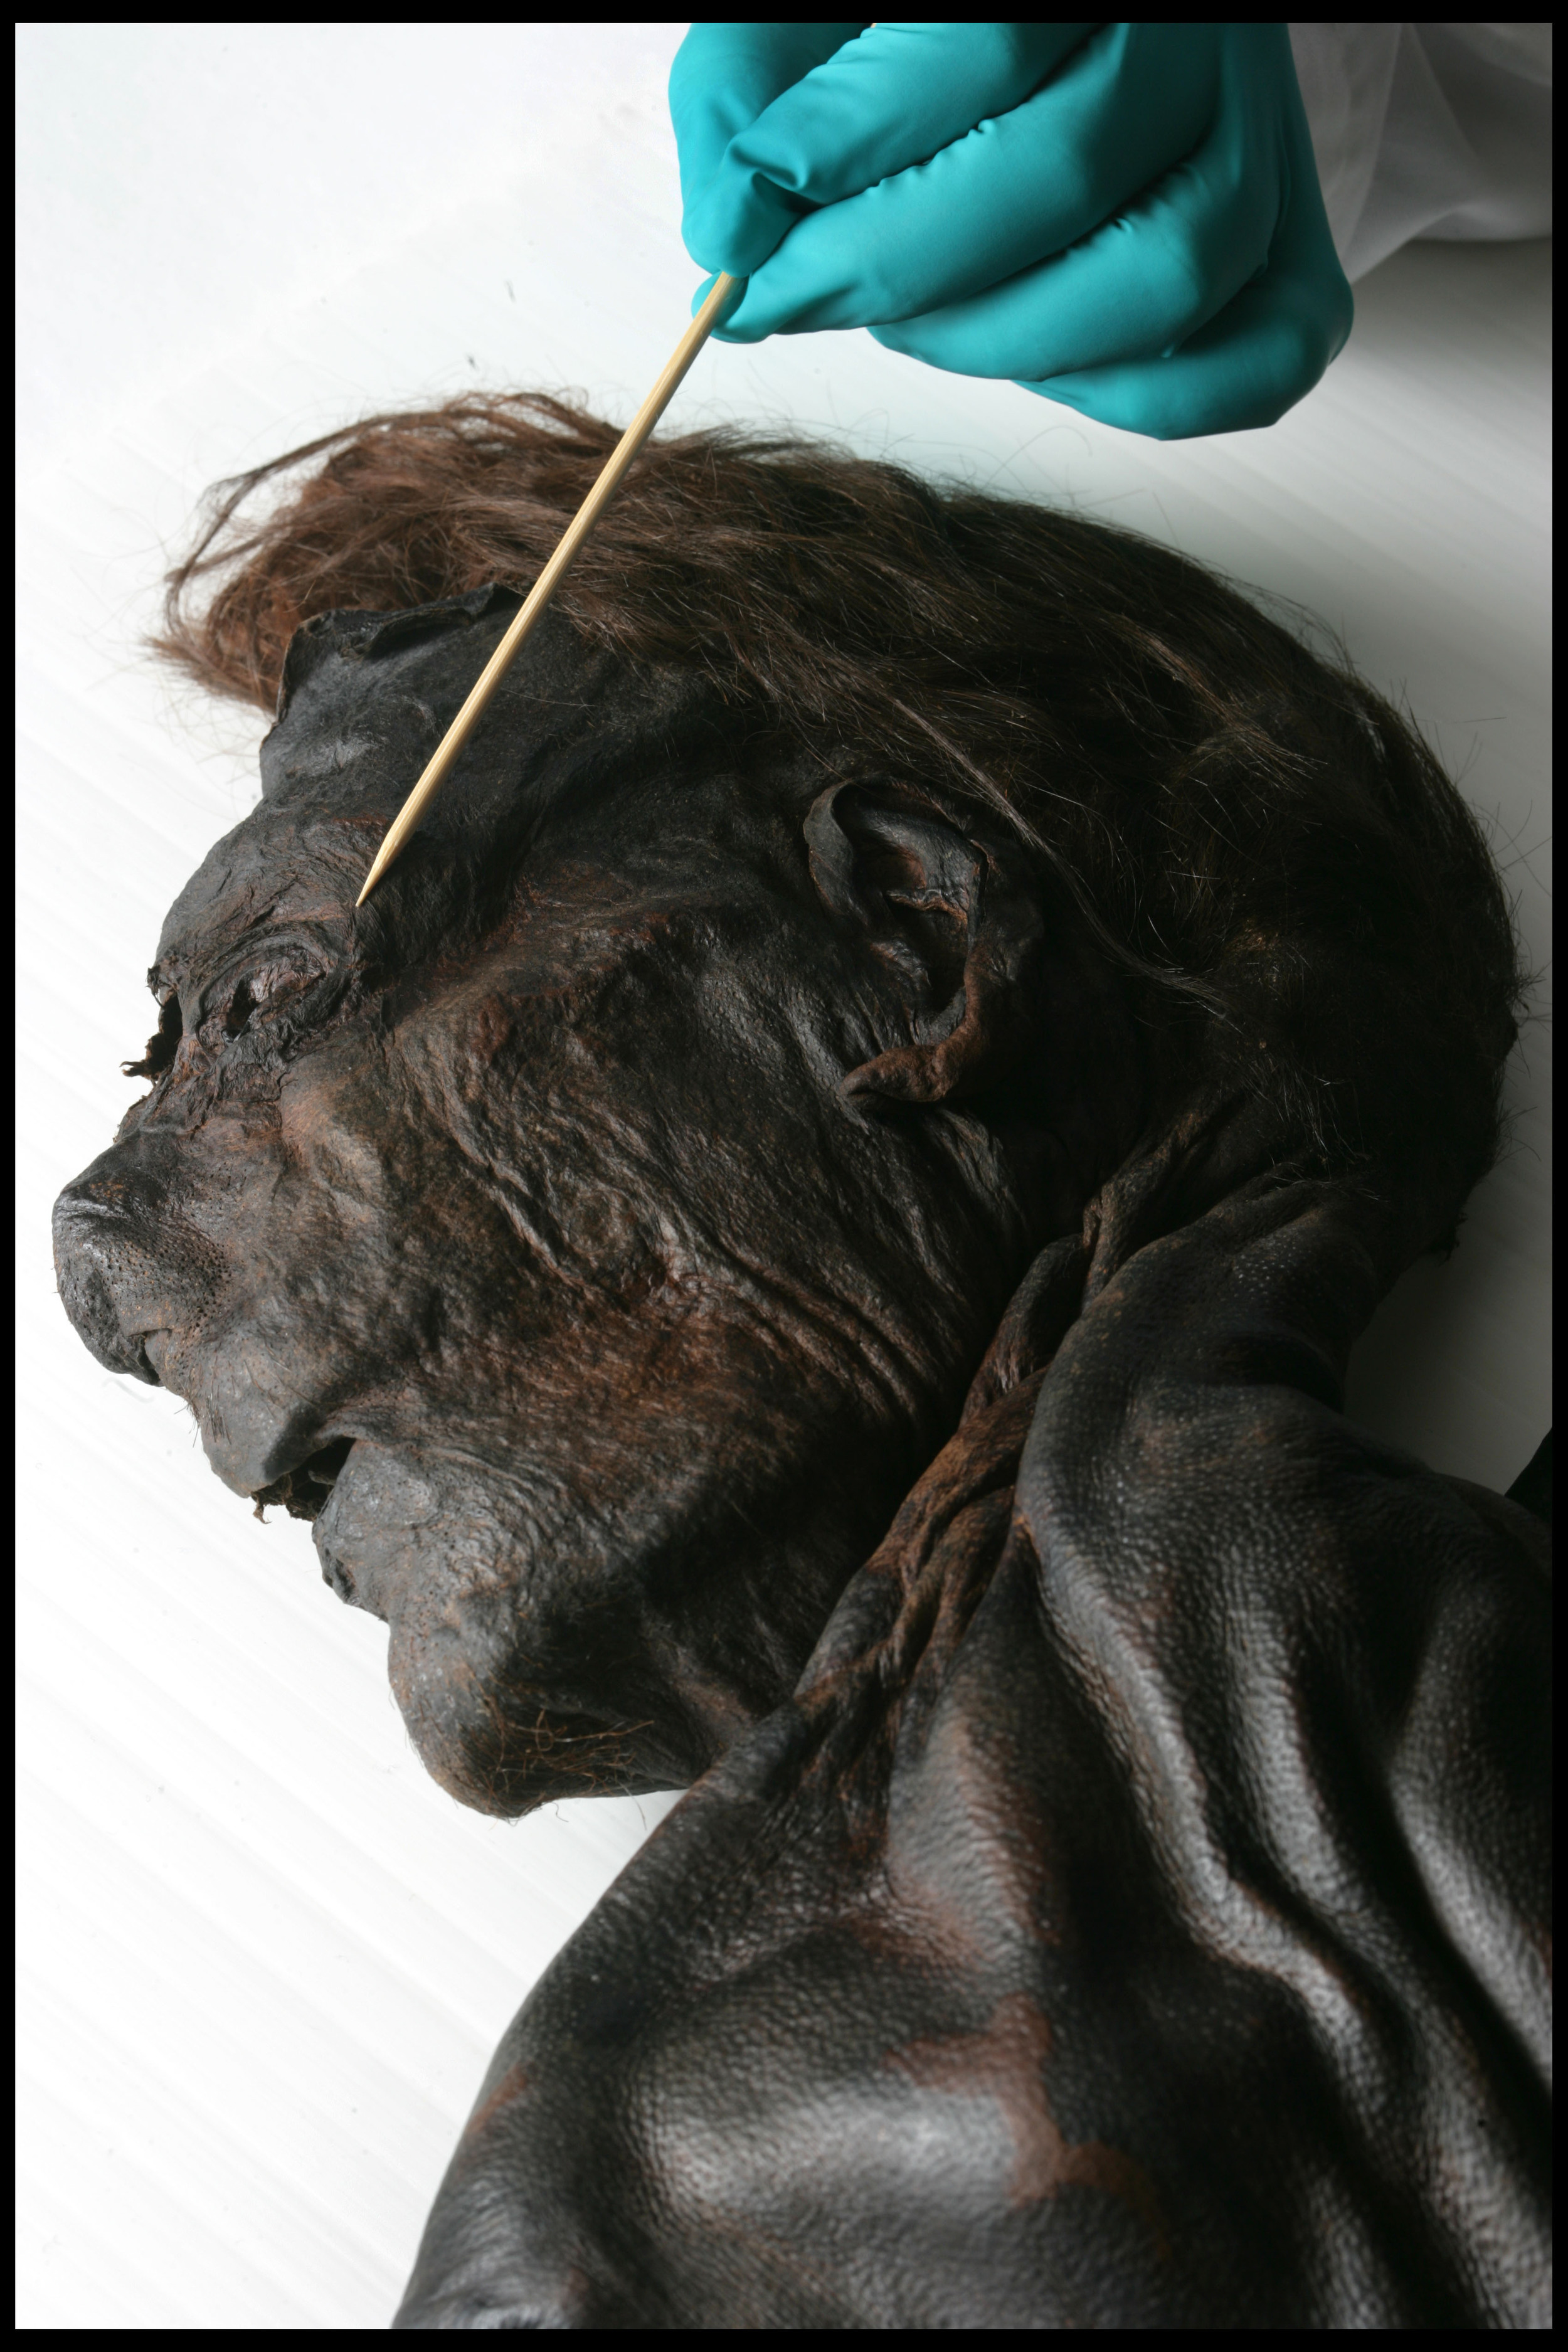 Clonycavan man, found in a bog in Co. Meath believed to date from 392-201 BC